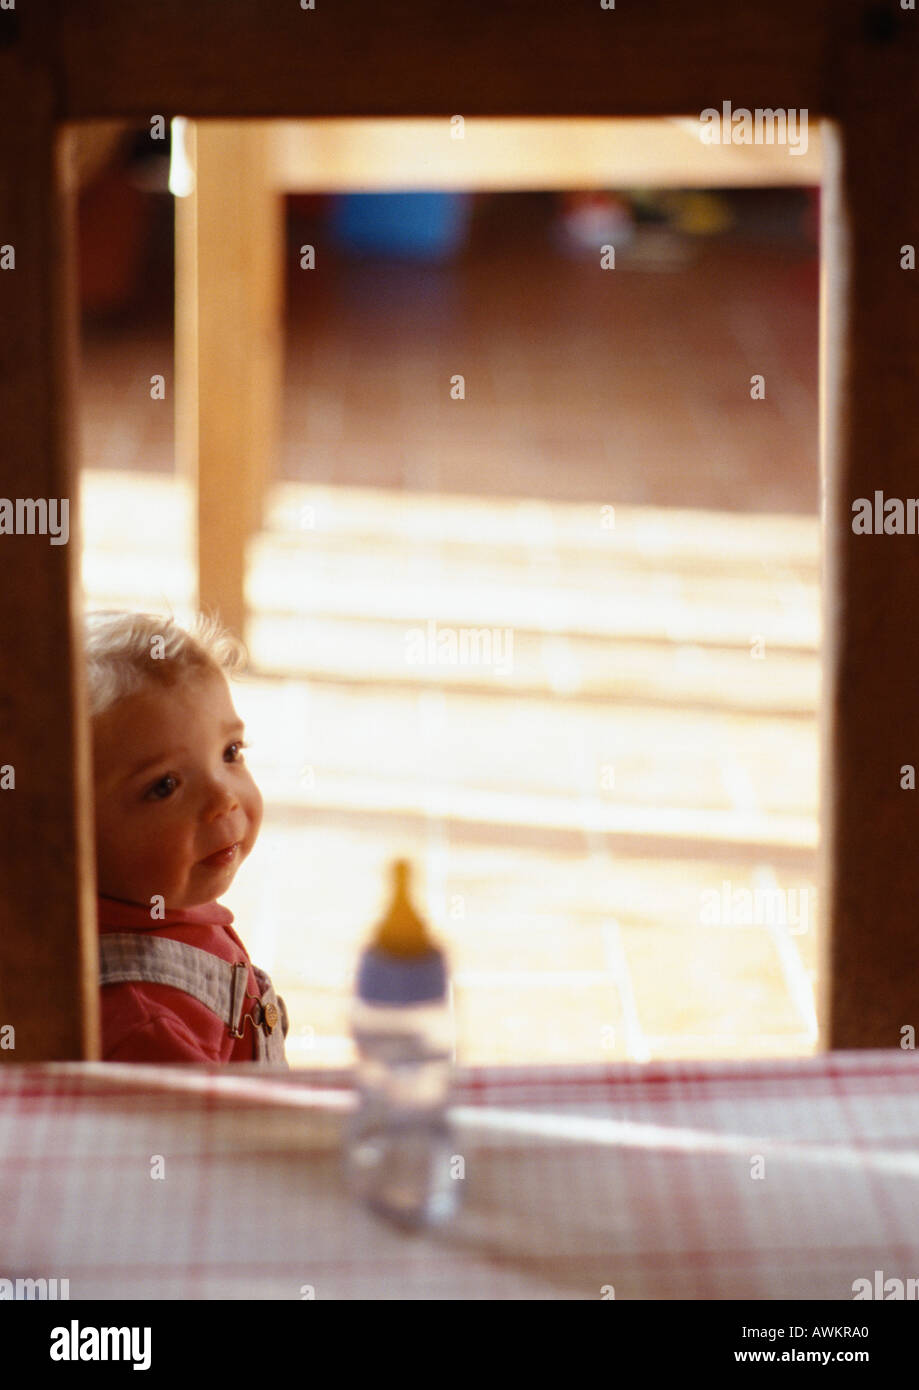 Toddler in a room, blurred baby's bottle in foreground Stock Photo